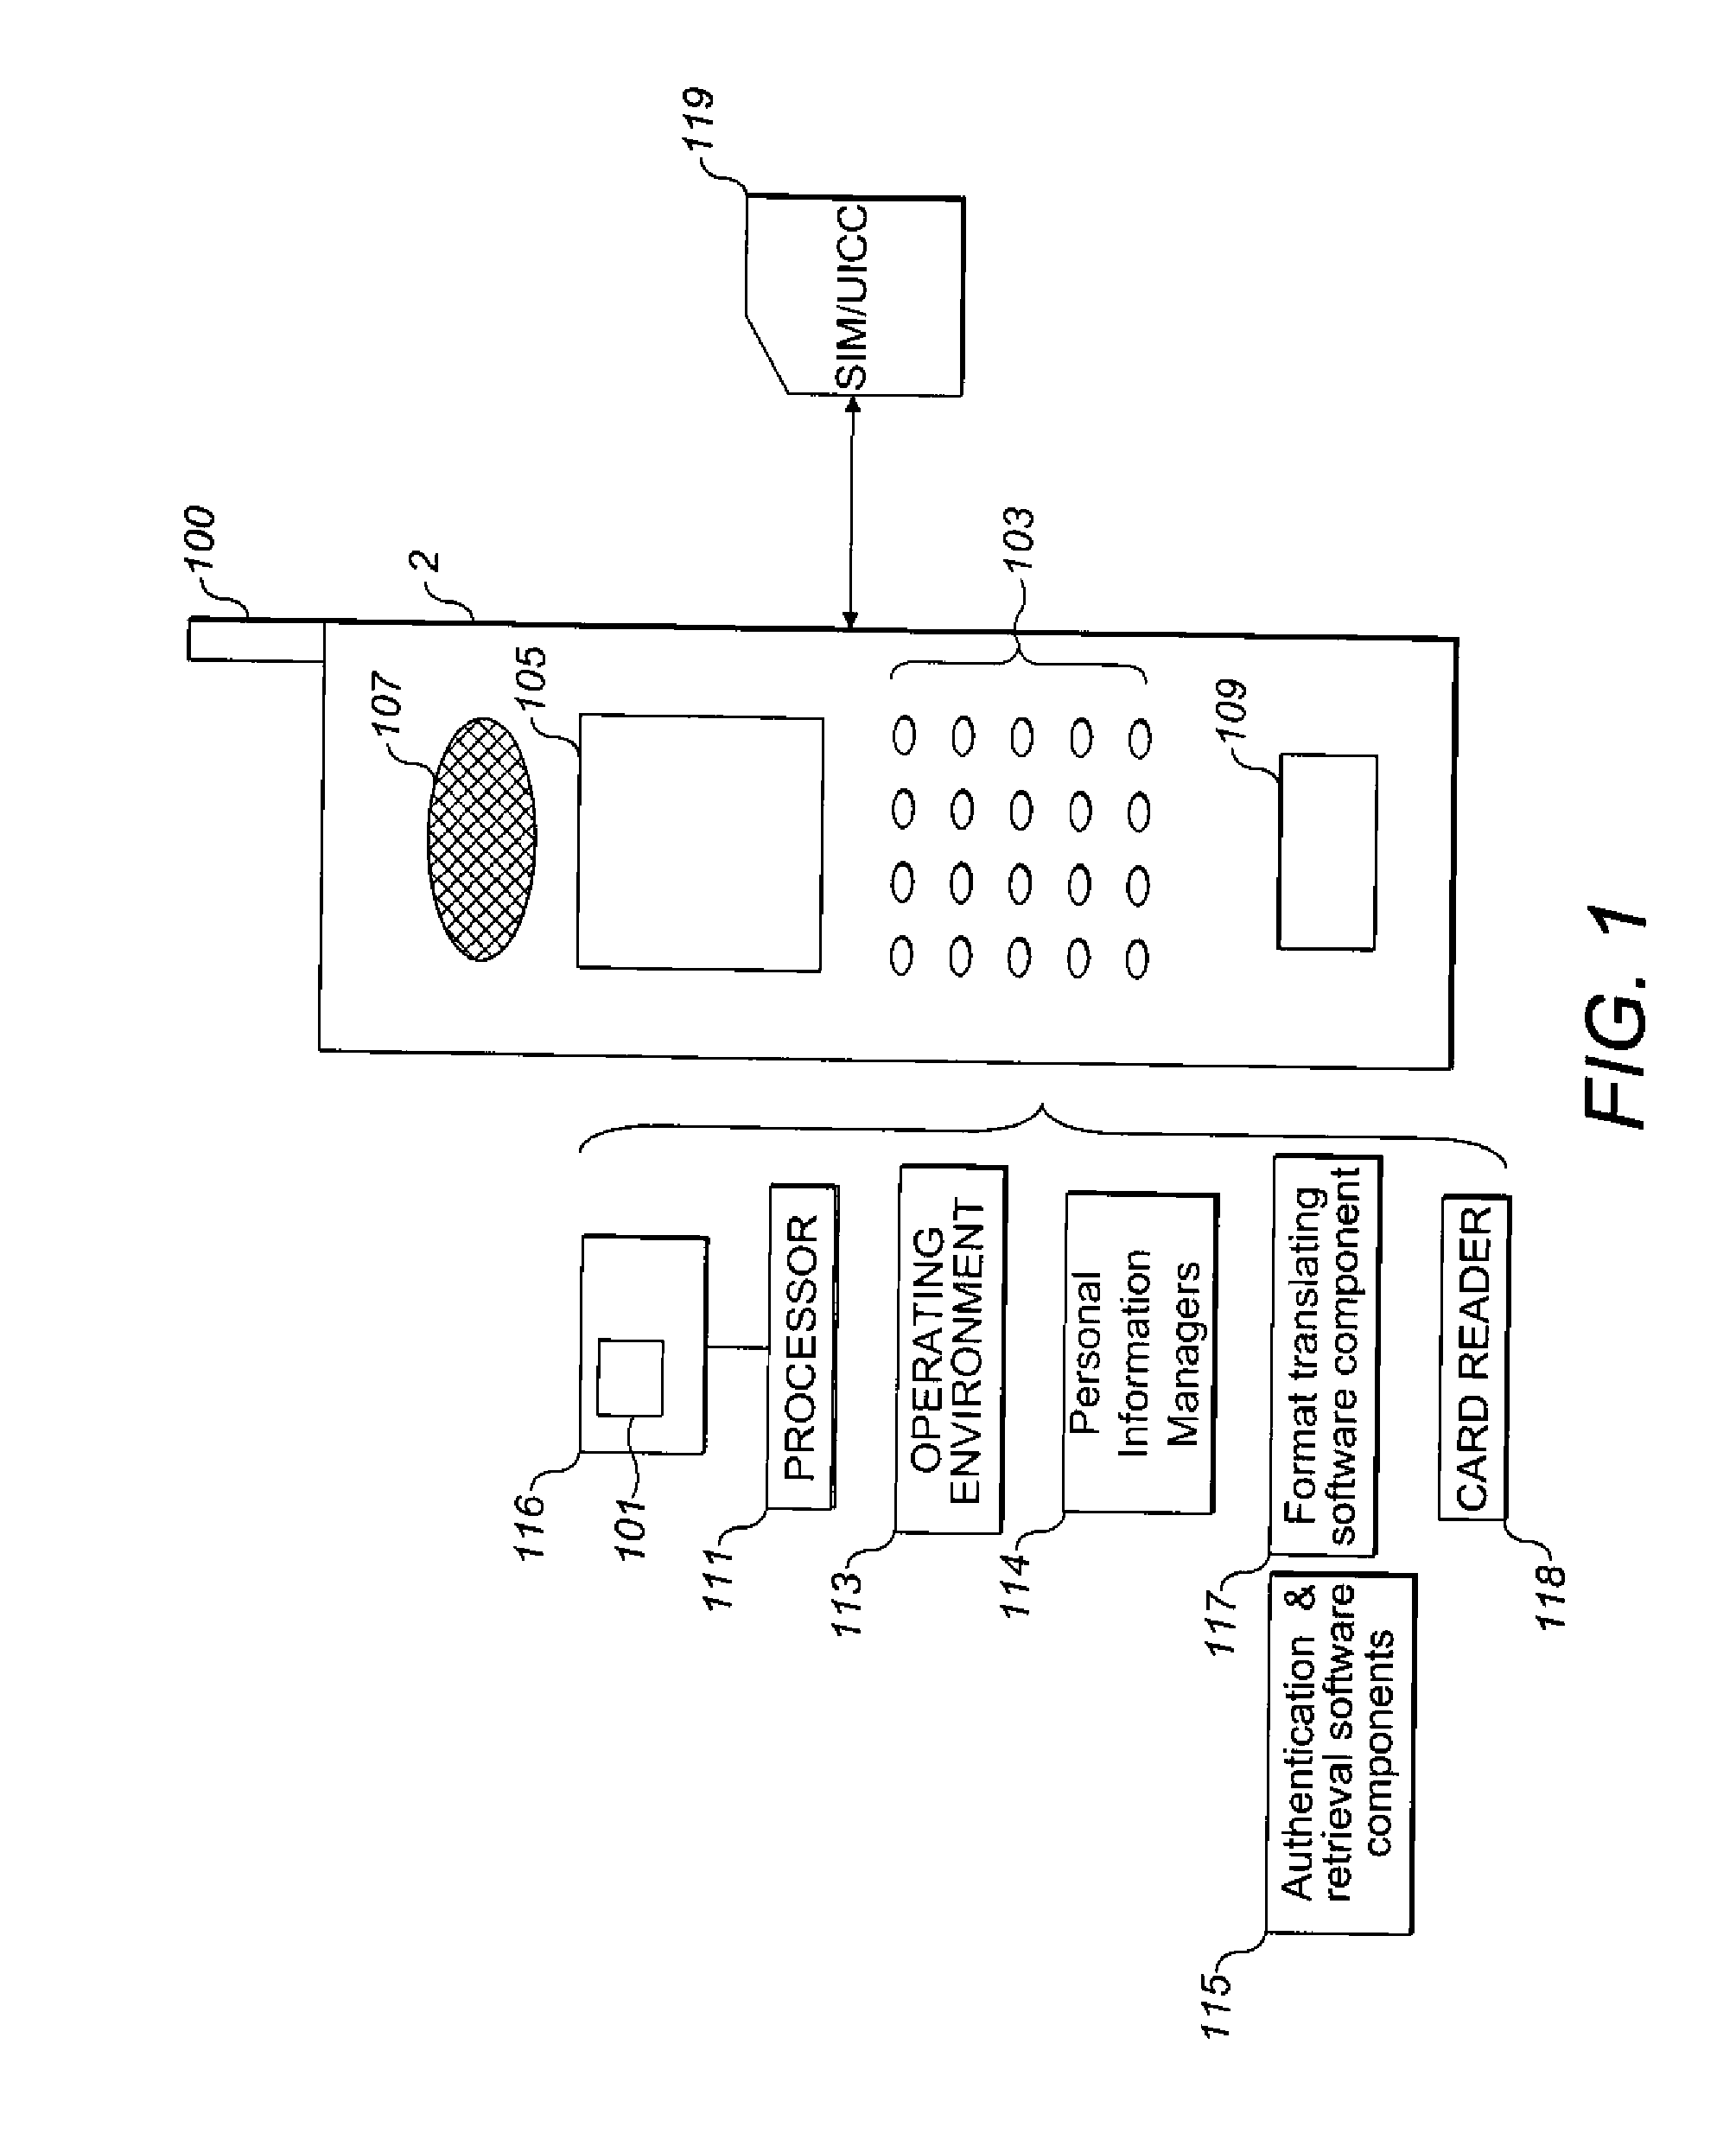 System and method for contactless smart-cards